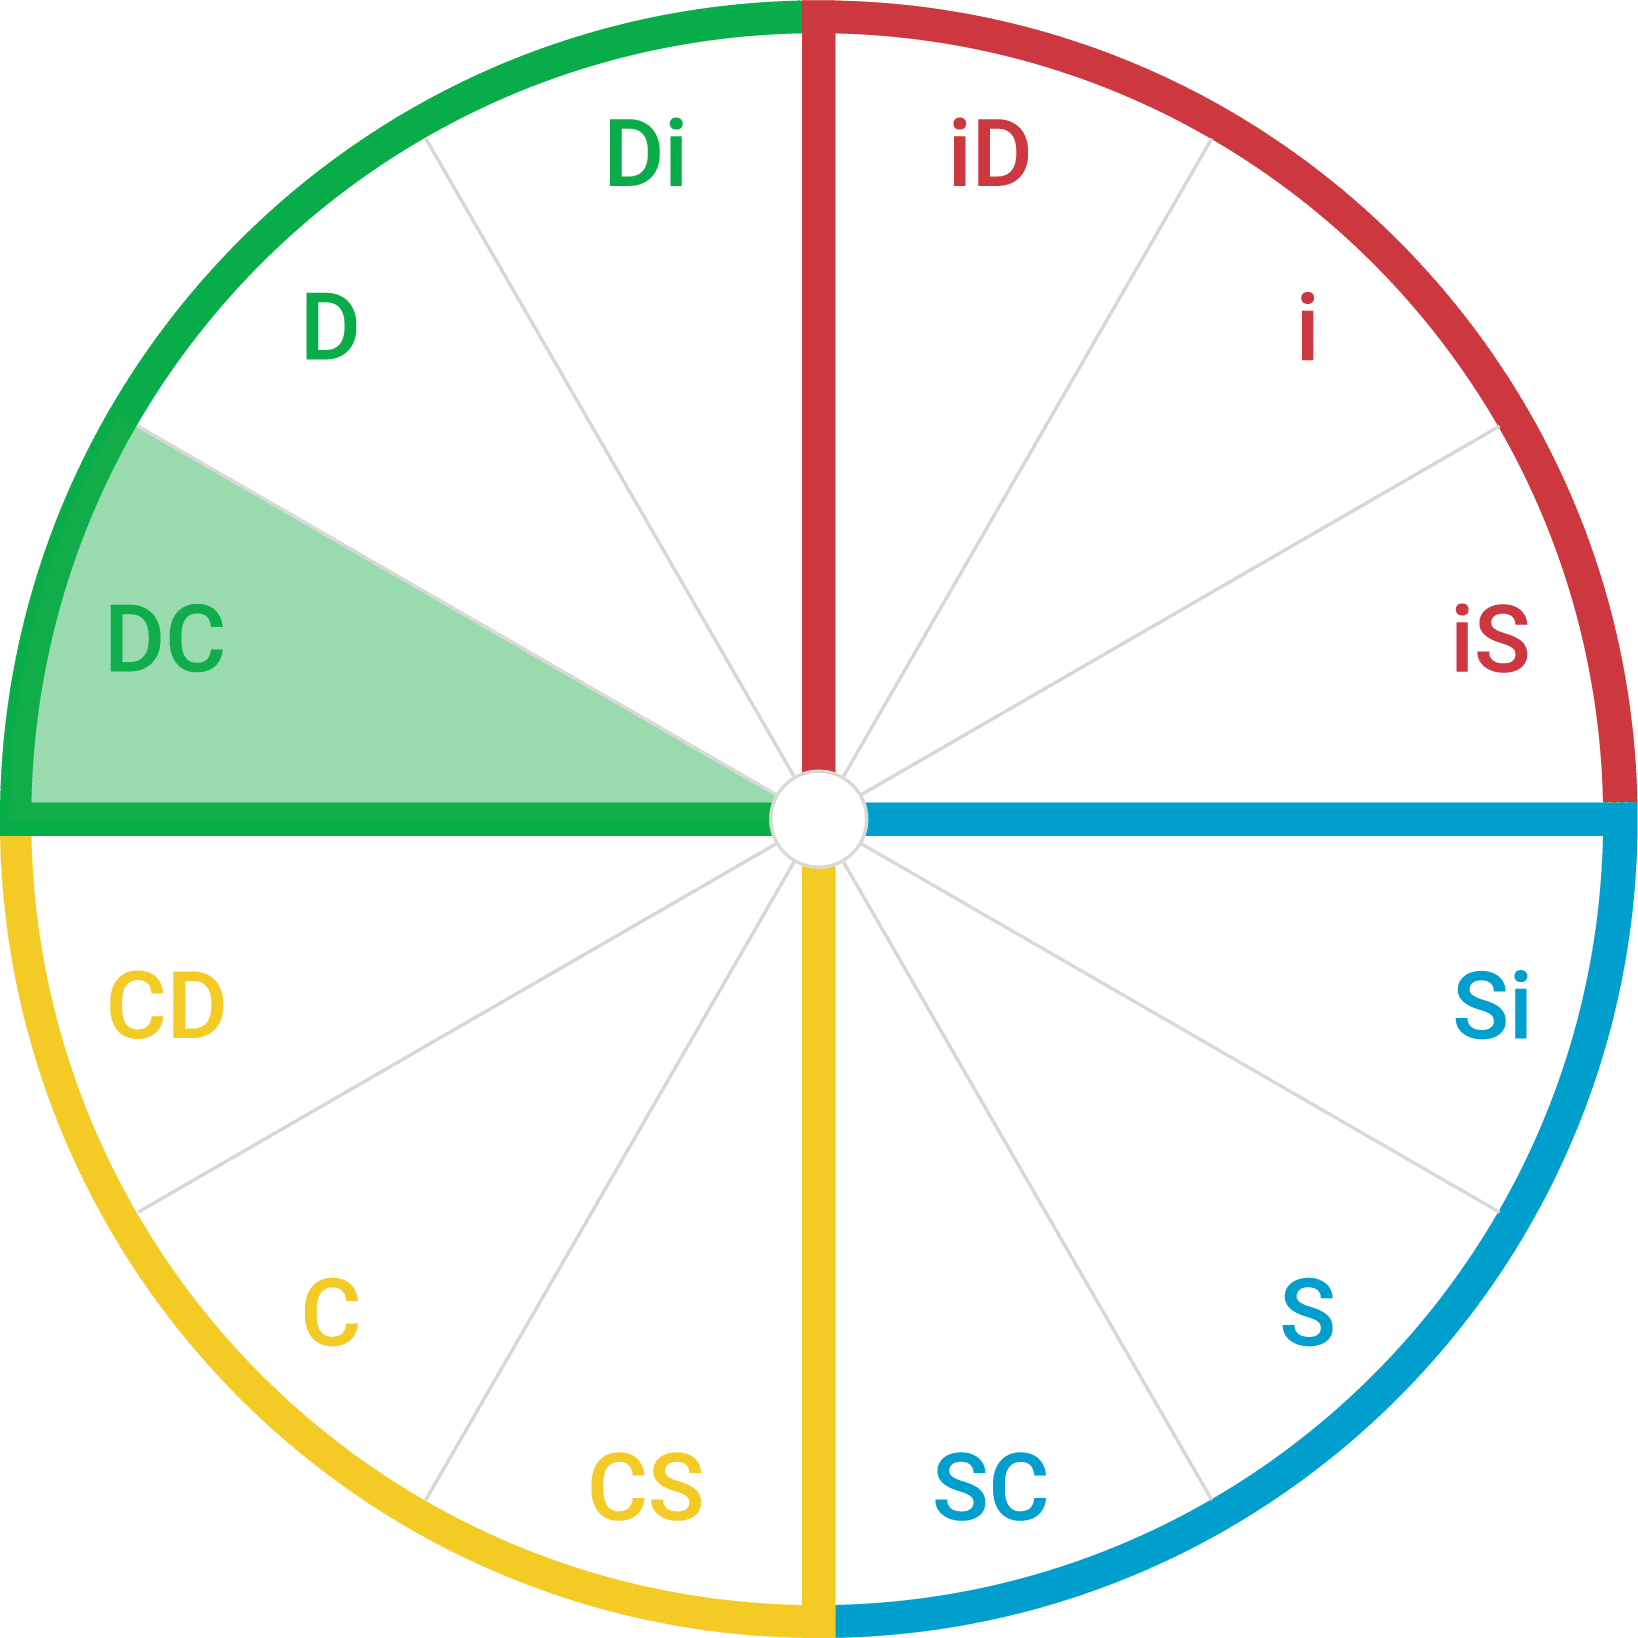 Circle showing the 12 style wedges. The DC wedge is highlighted.